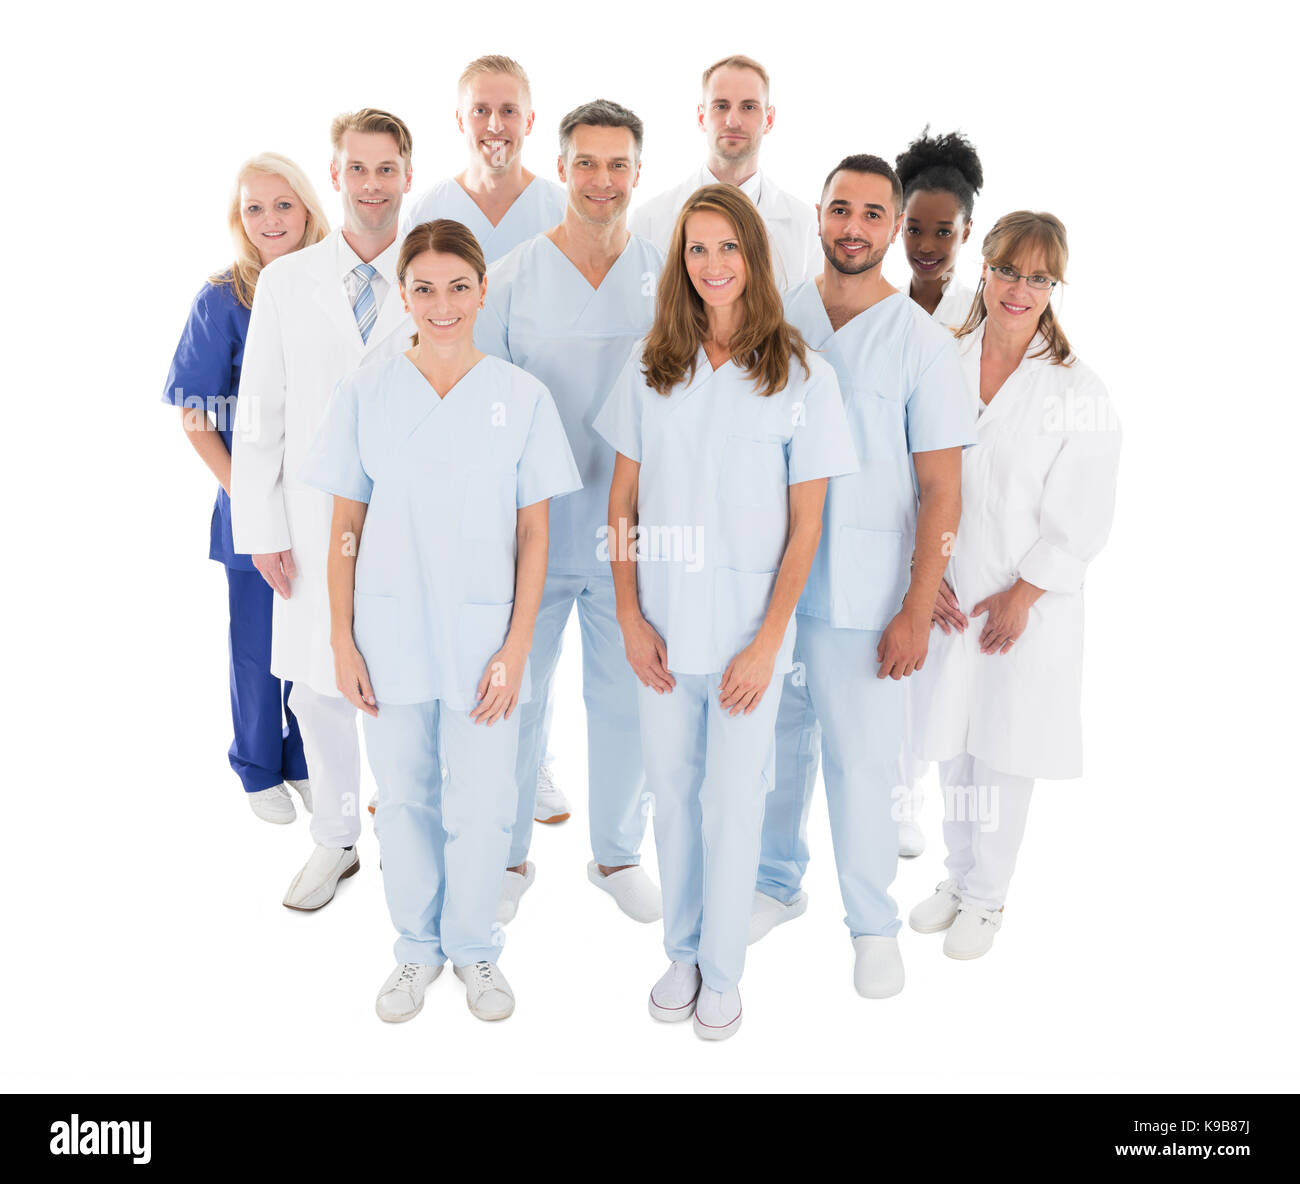 Portrait of happy multiethnic medical team standing against white background Stock Photo